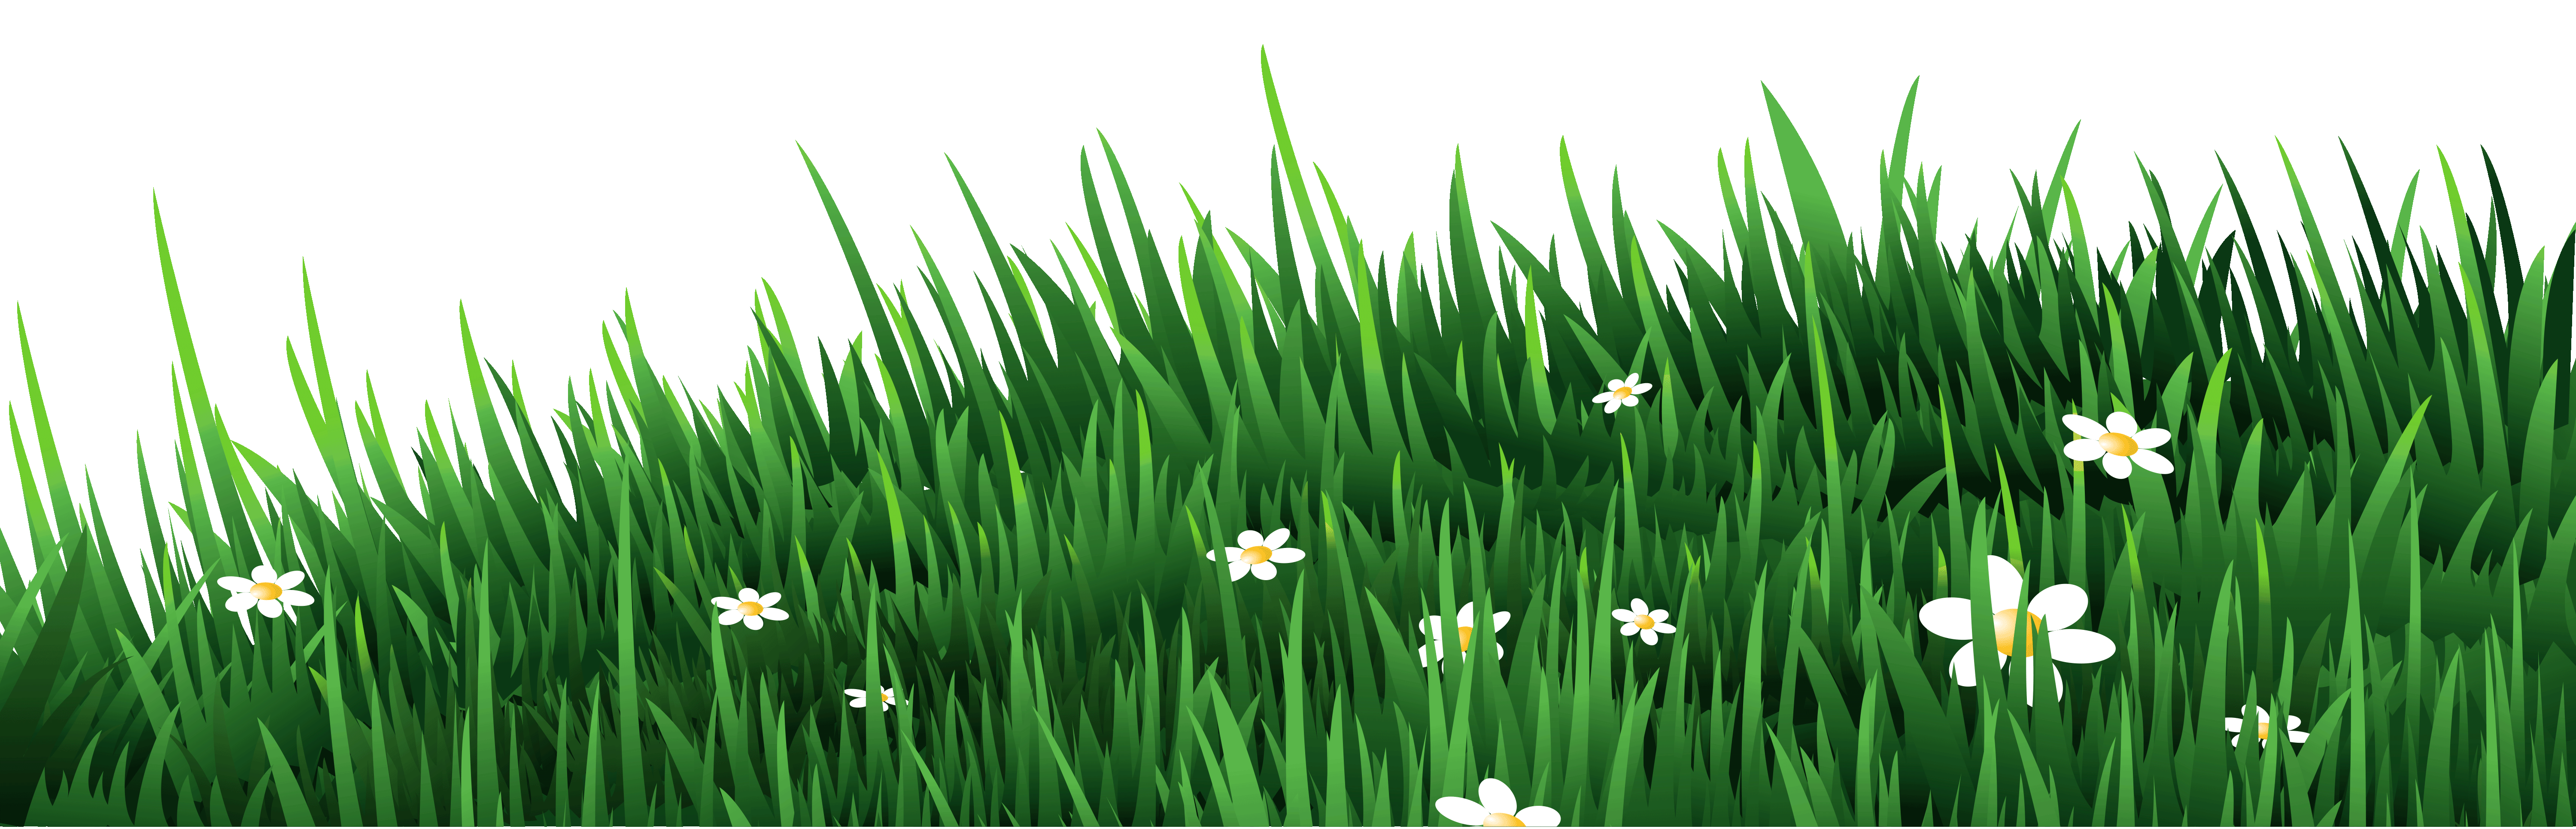 Clipart grass frame. Transparent with white daisies